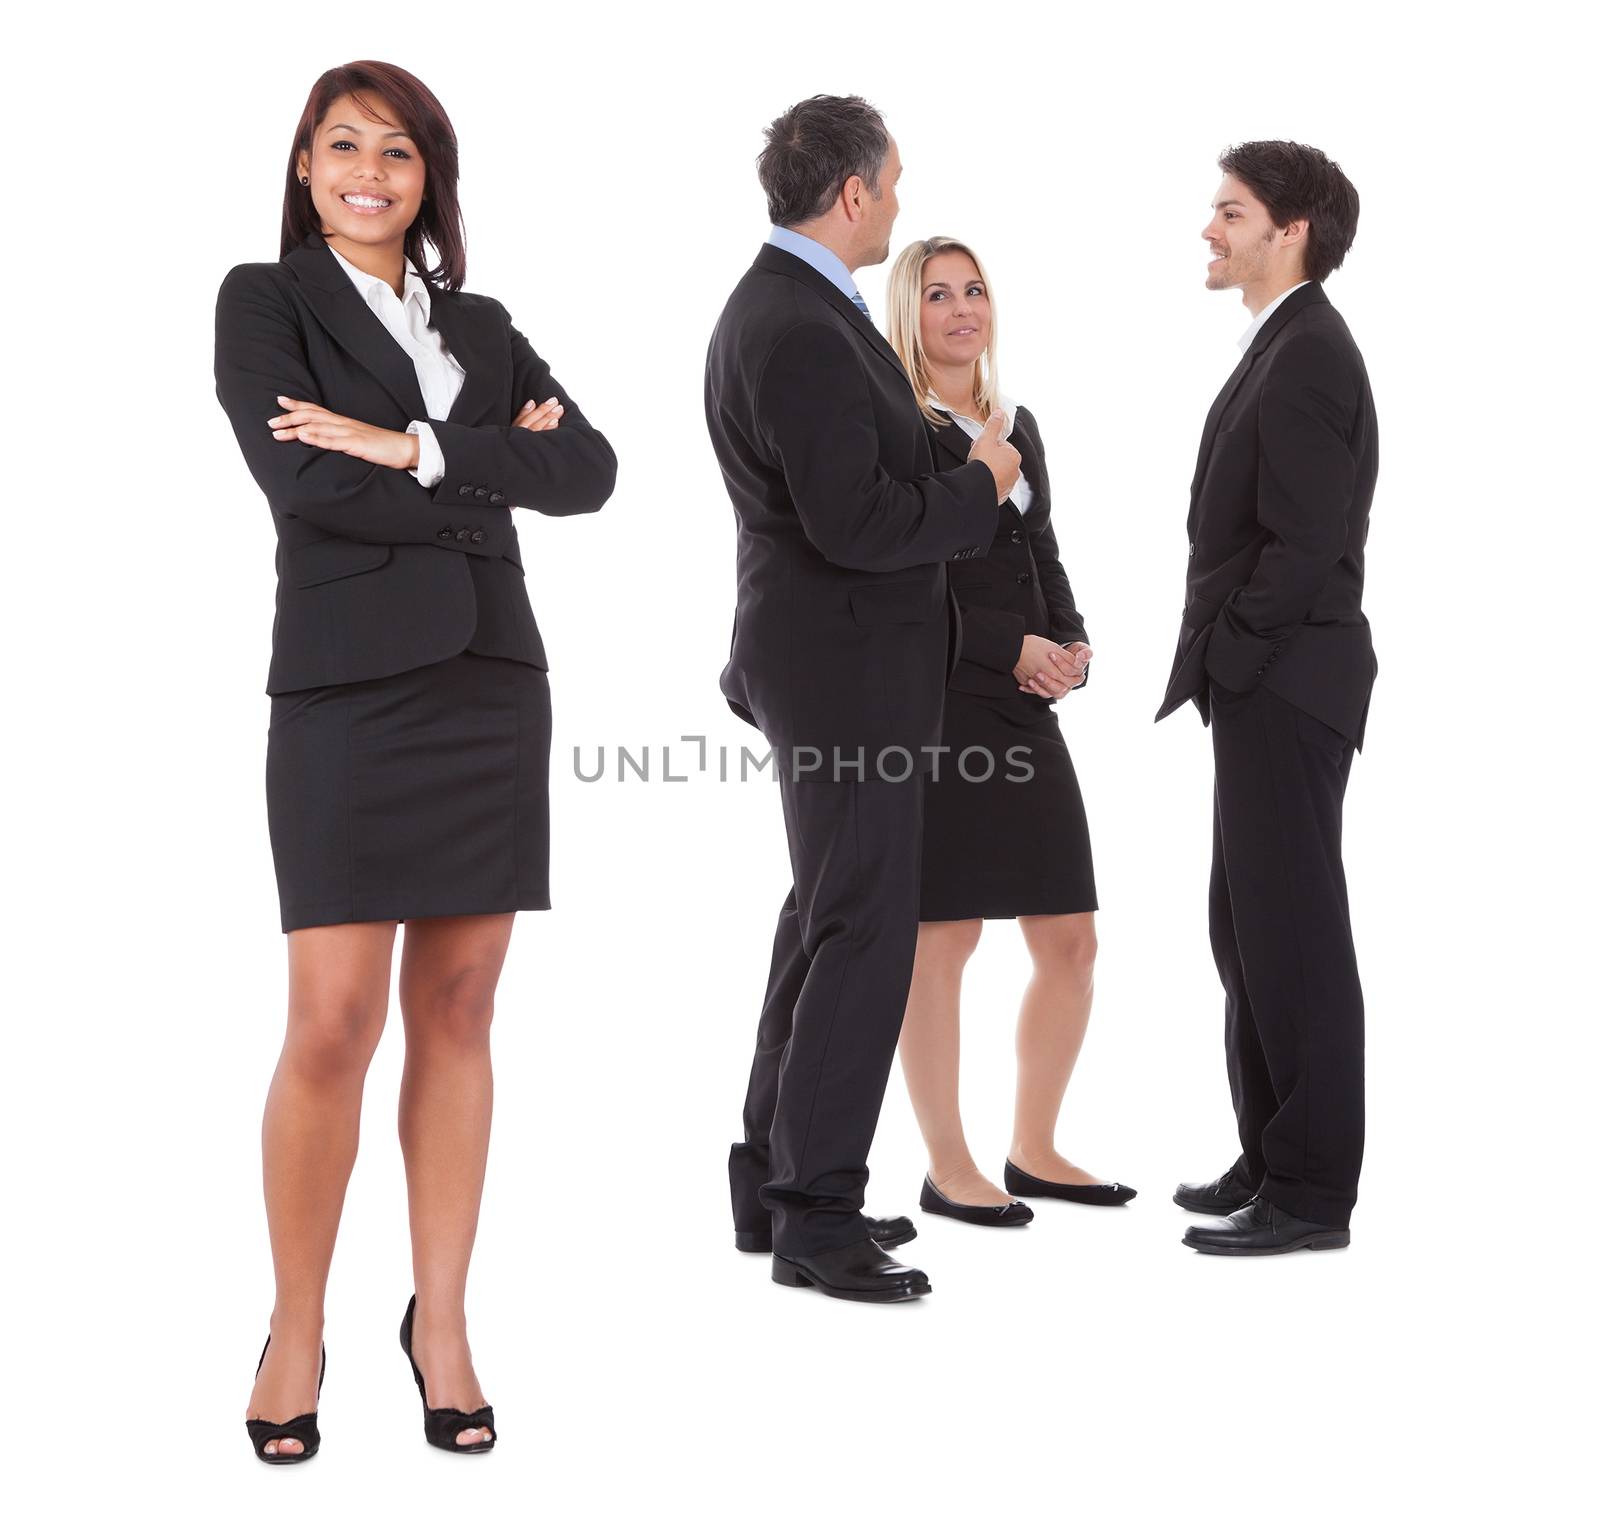 Confident businesswoman with successful group of business people on white background